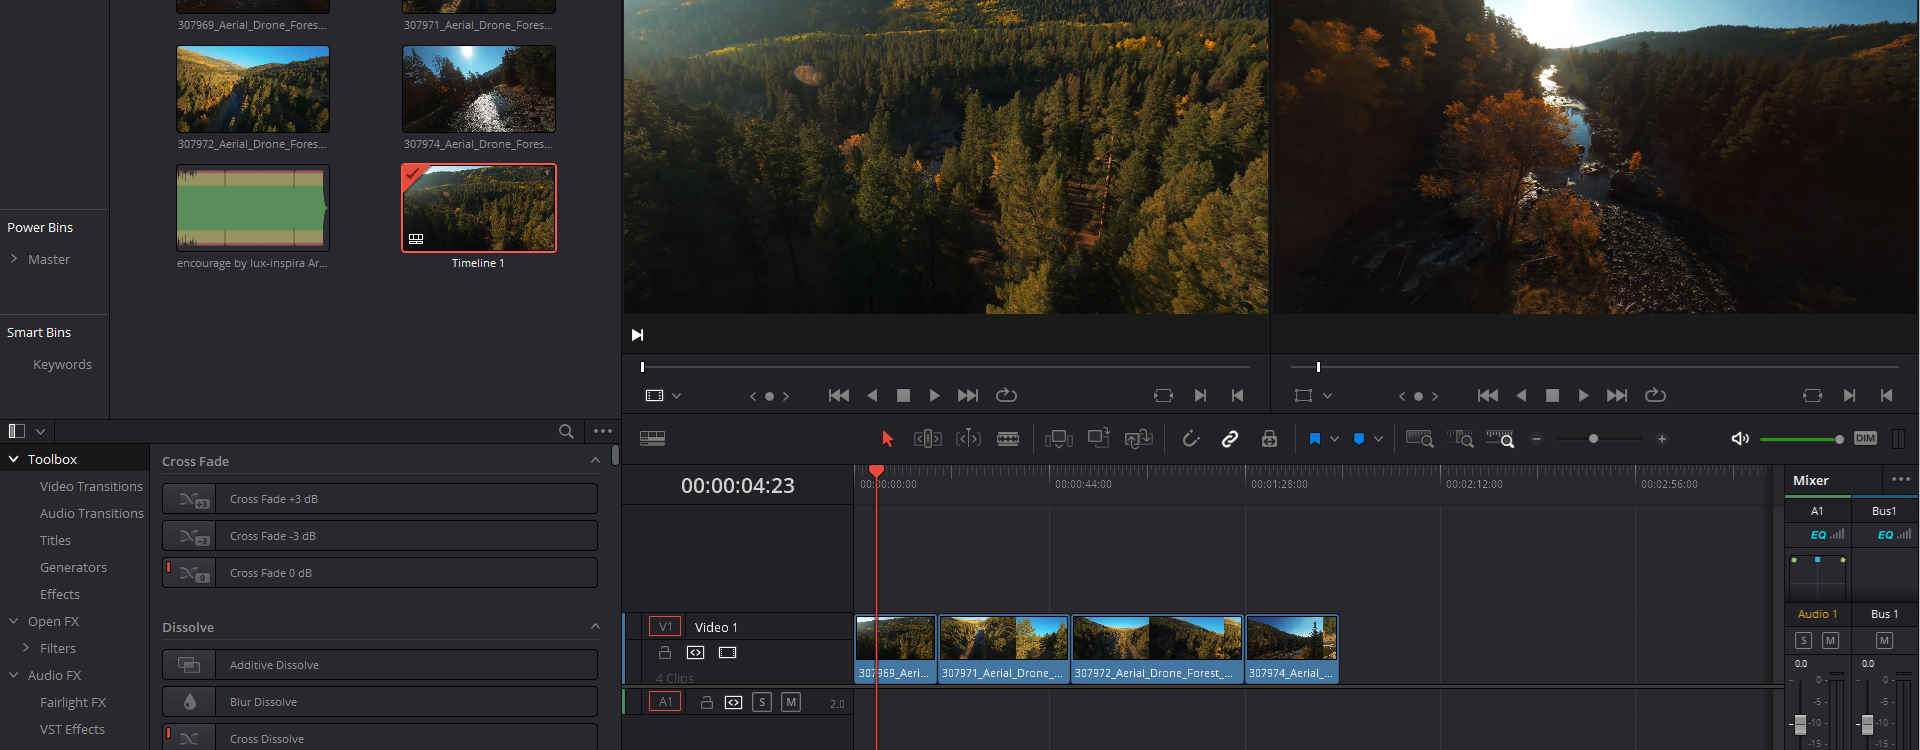 How to Edit  Videos: a Complete Beginner's Guide